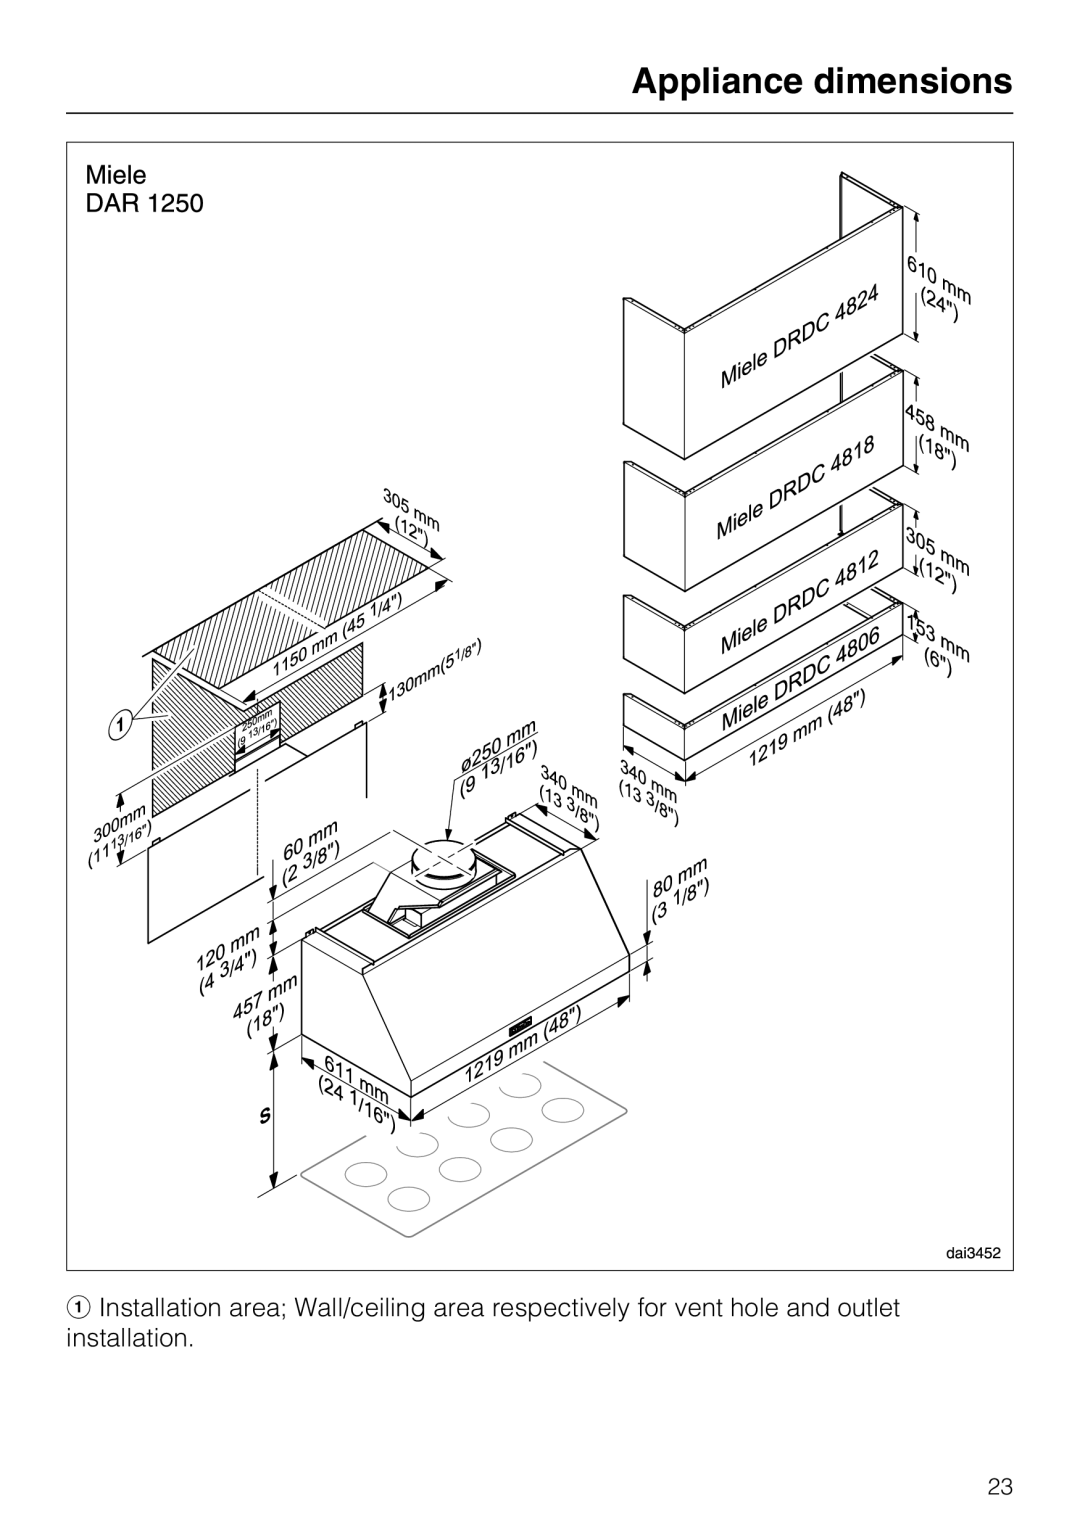 Miele 09 824 260 installation instructions Appliance dimensions 